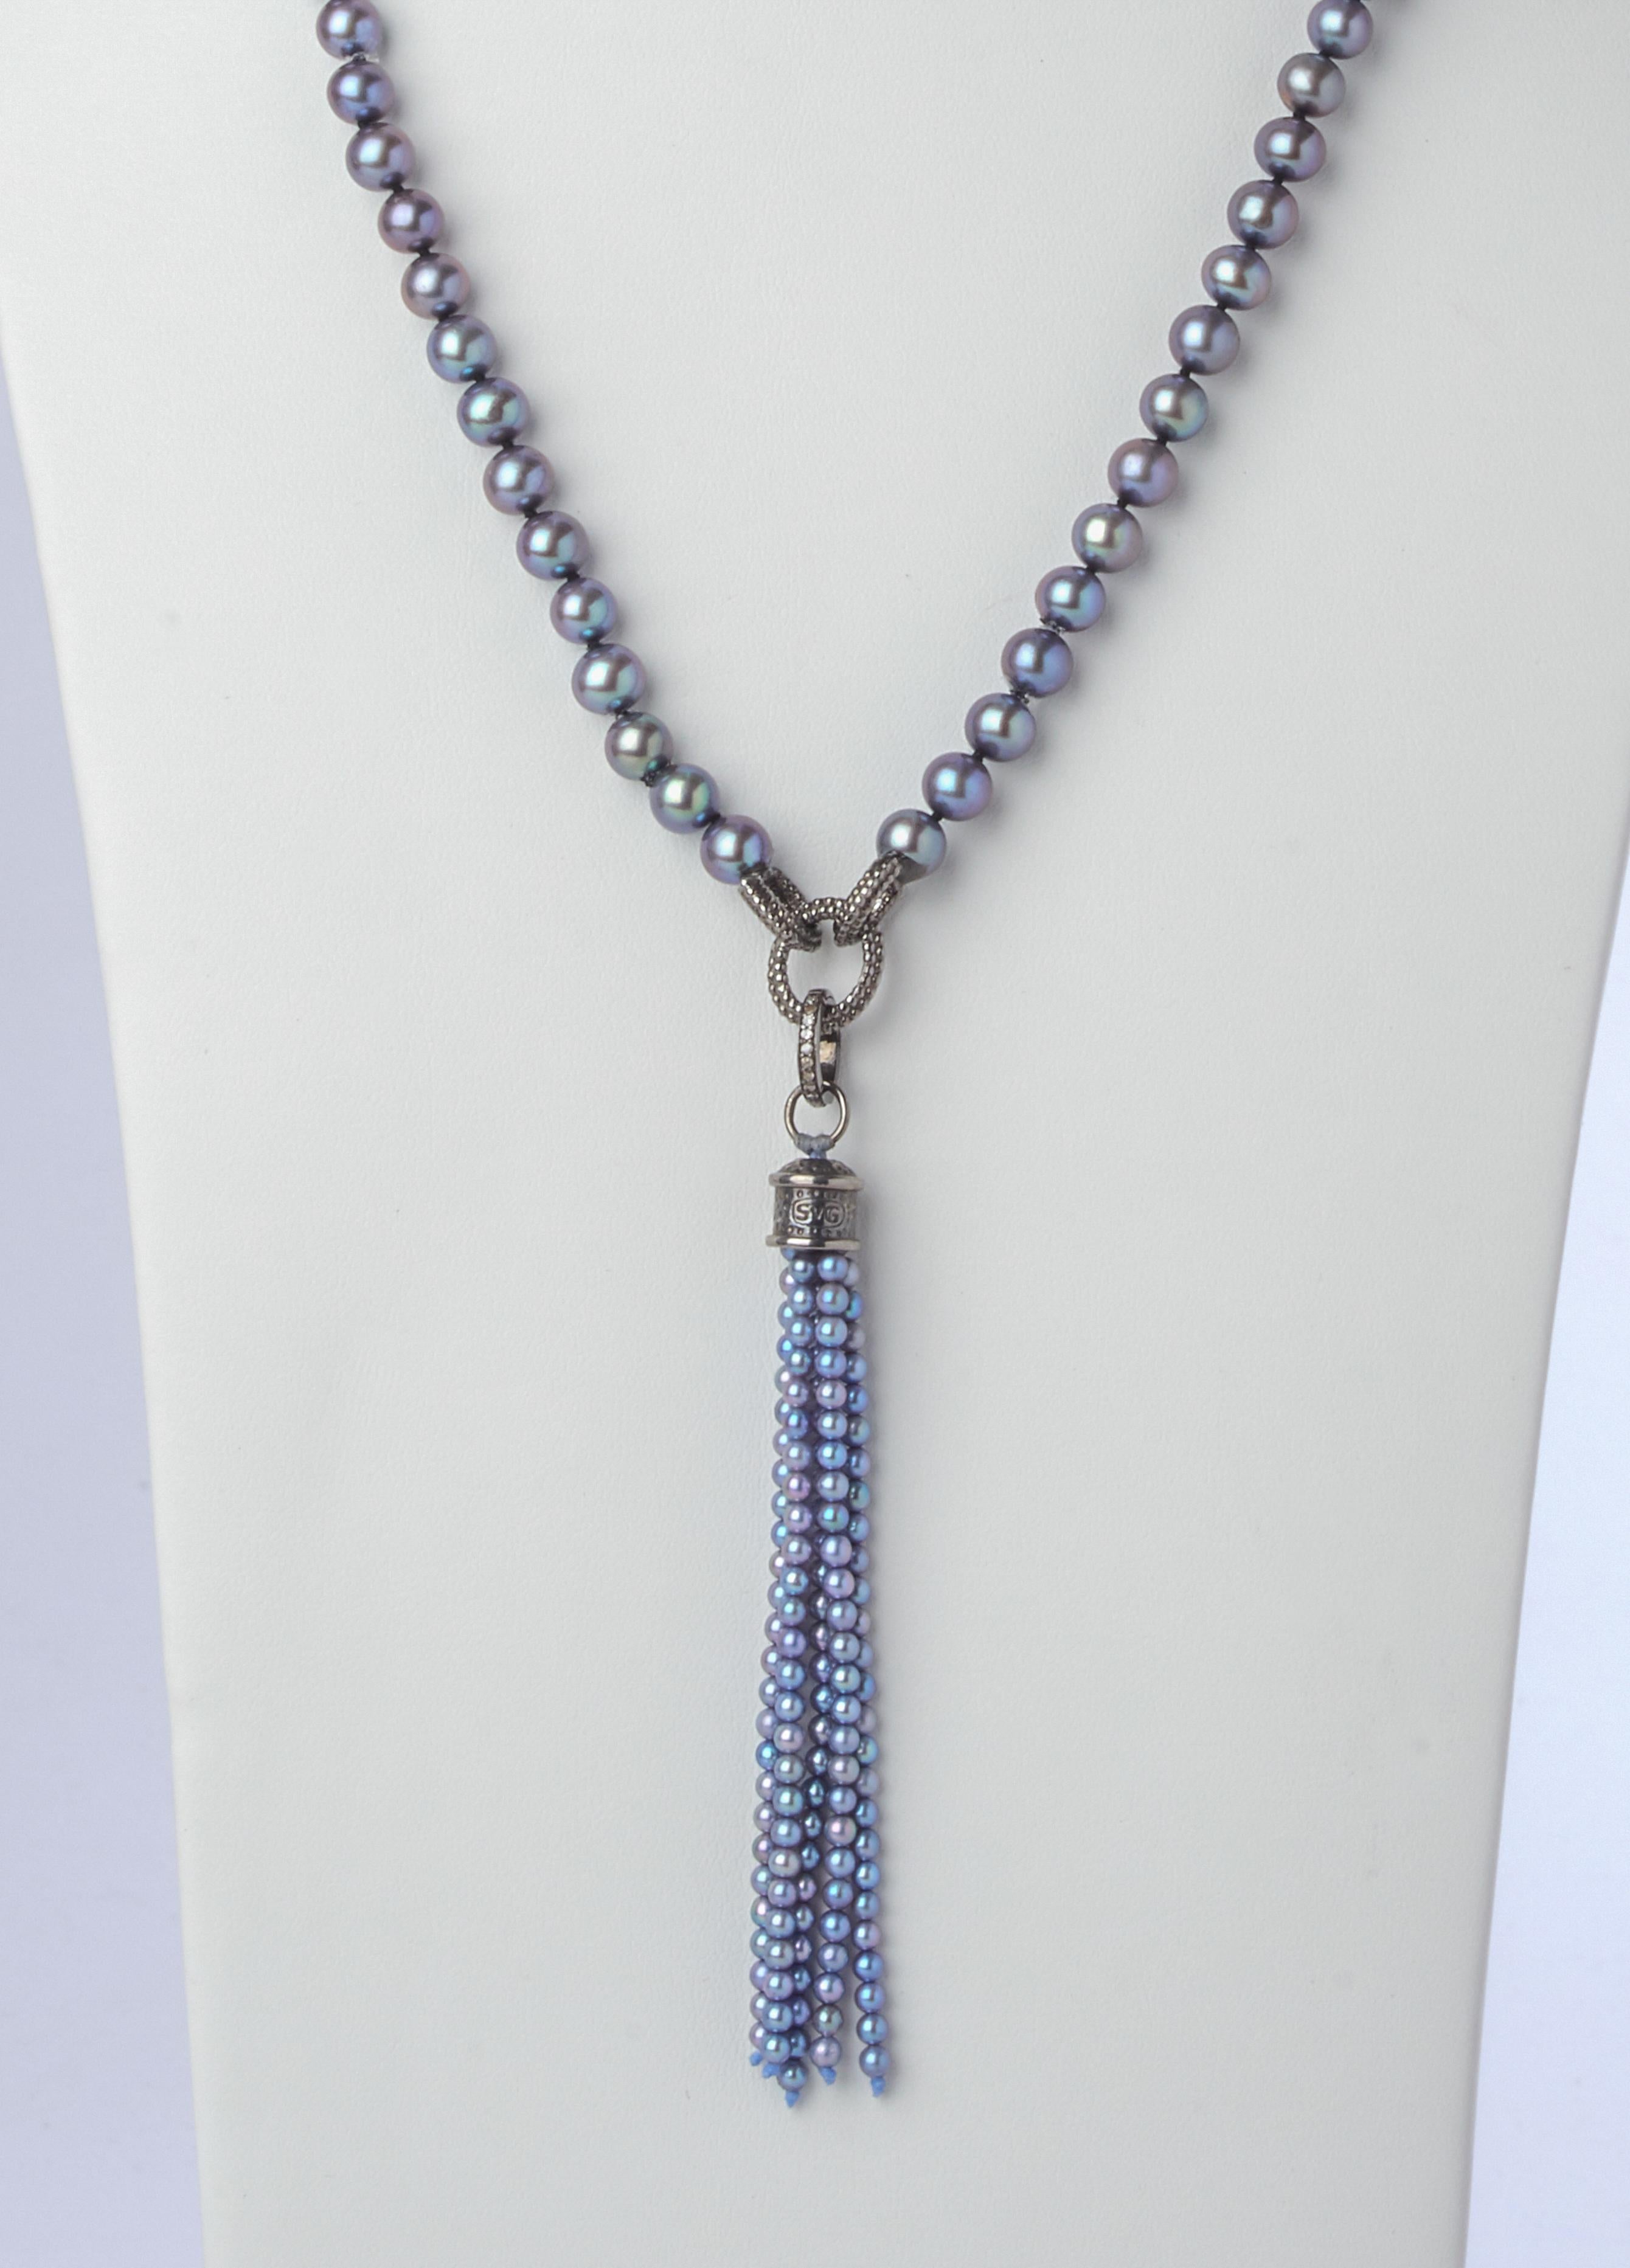 Rich blue, gray and silver tones radiate from this twenty one inch strand of dyed 6-1/2 mm pearls enhanced with two stations of decorative textured silver link chain. Complimenting is a sterling silver and pearl tassel pendant enhancer that is